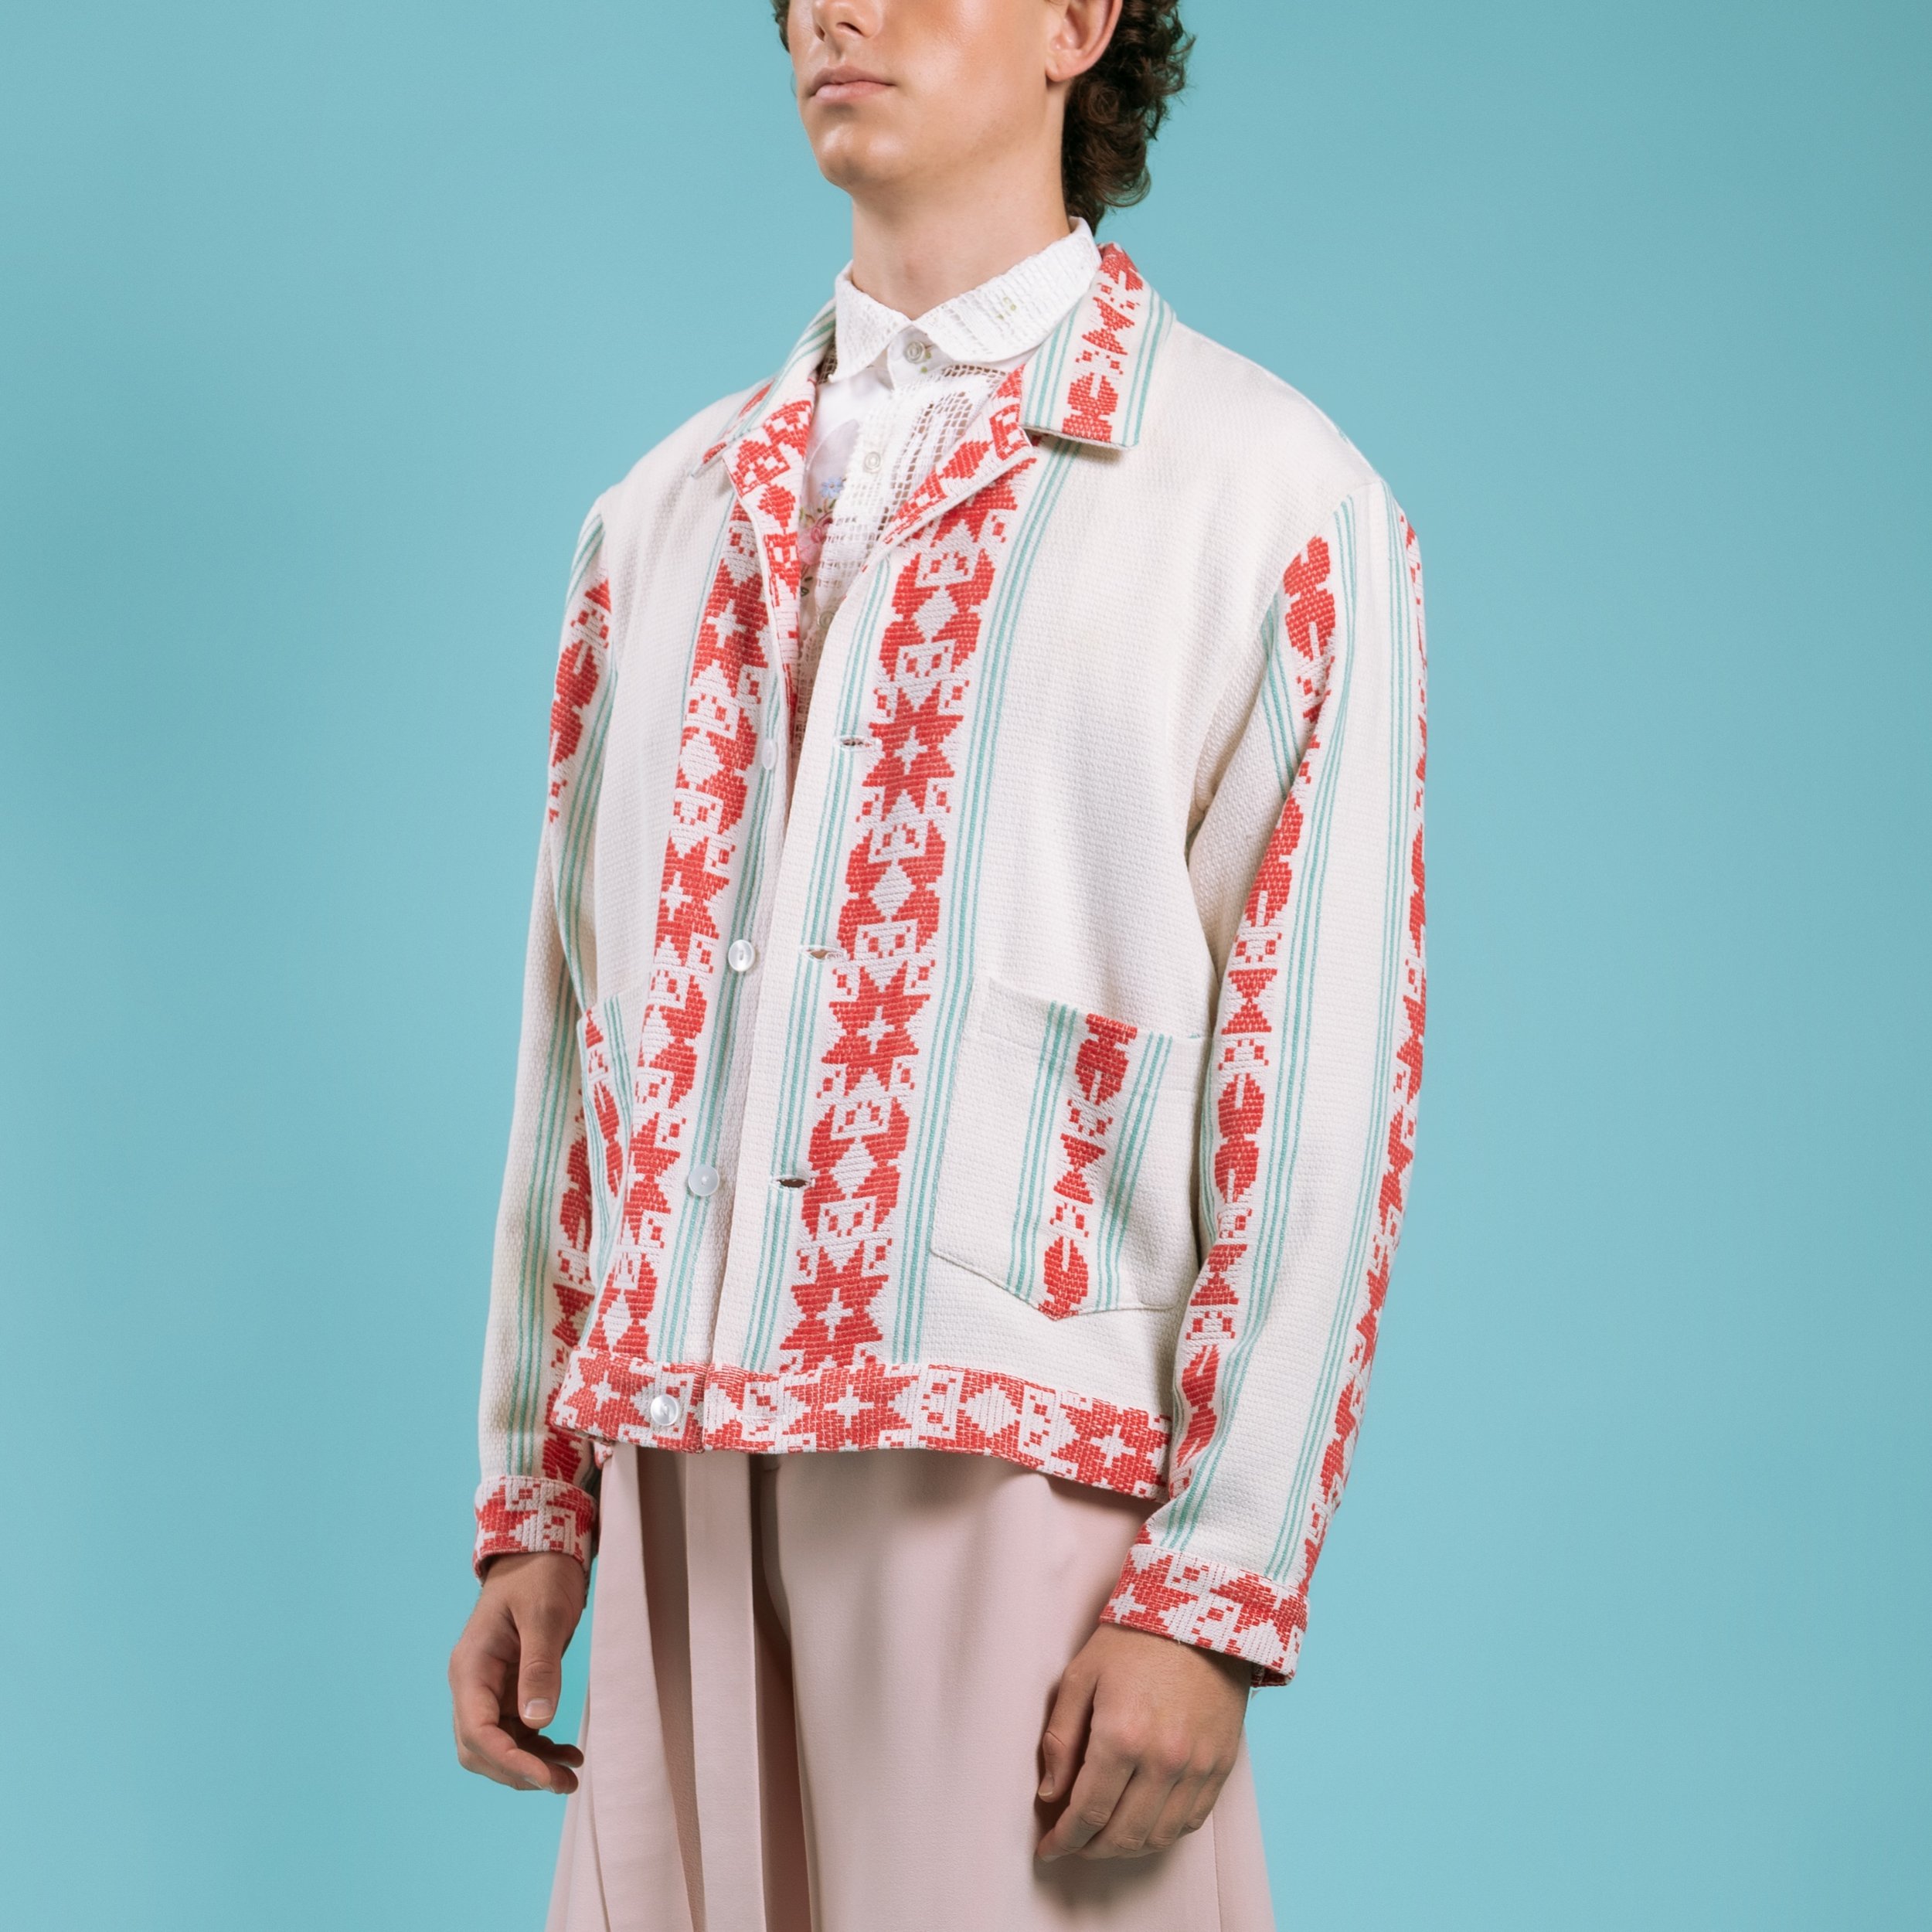 🤩🌍♻️ The Munro one-of-a-kind repurposed jacket was created following the success of our Moroni repurposed shirts. 

The concept takes vintage fabrics that are sourced in and around the Mediterranean that are given a new life, by repurposing the fab